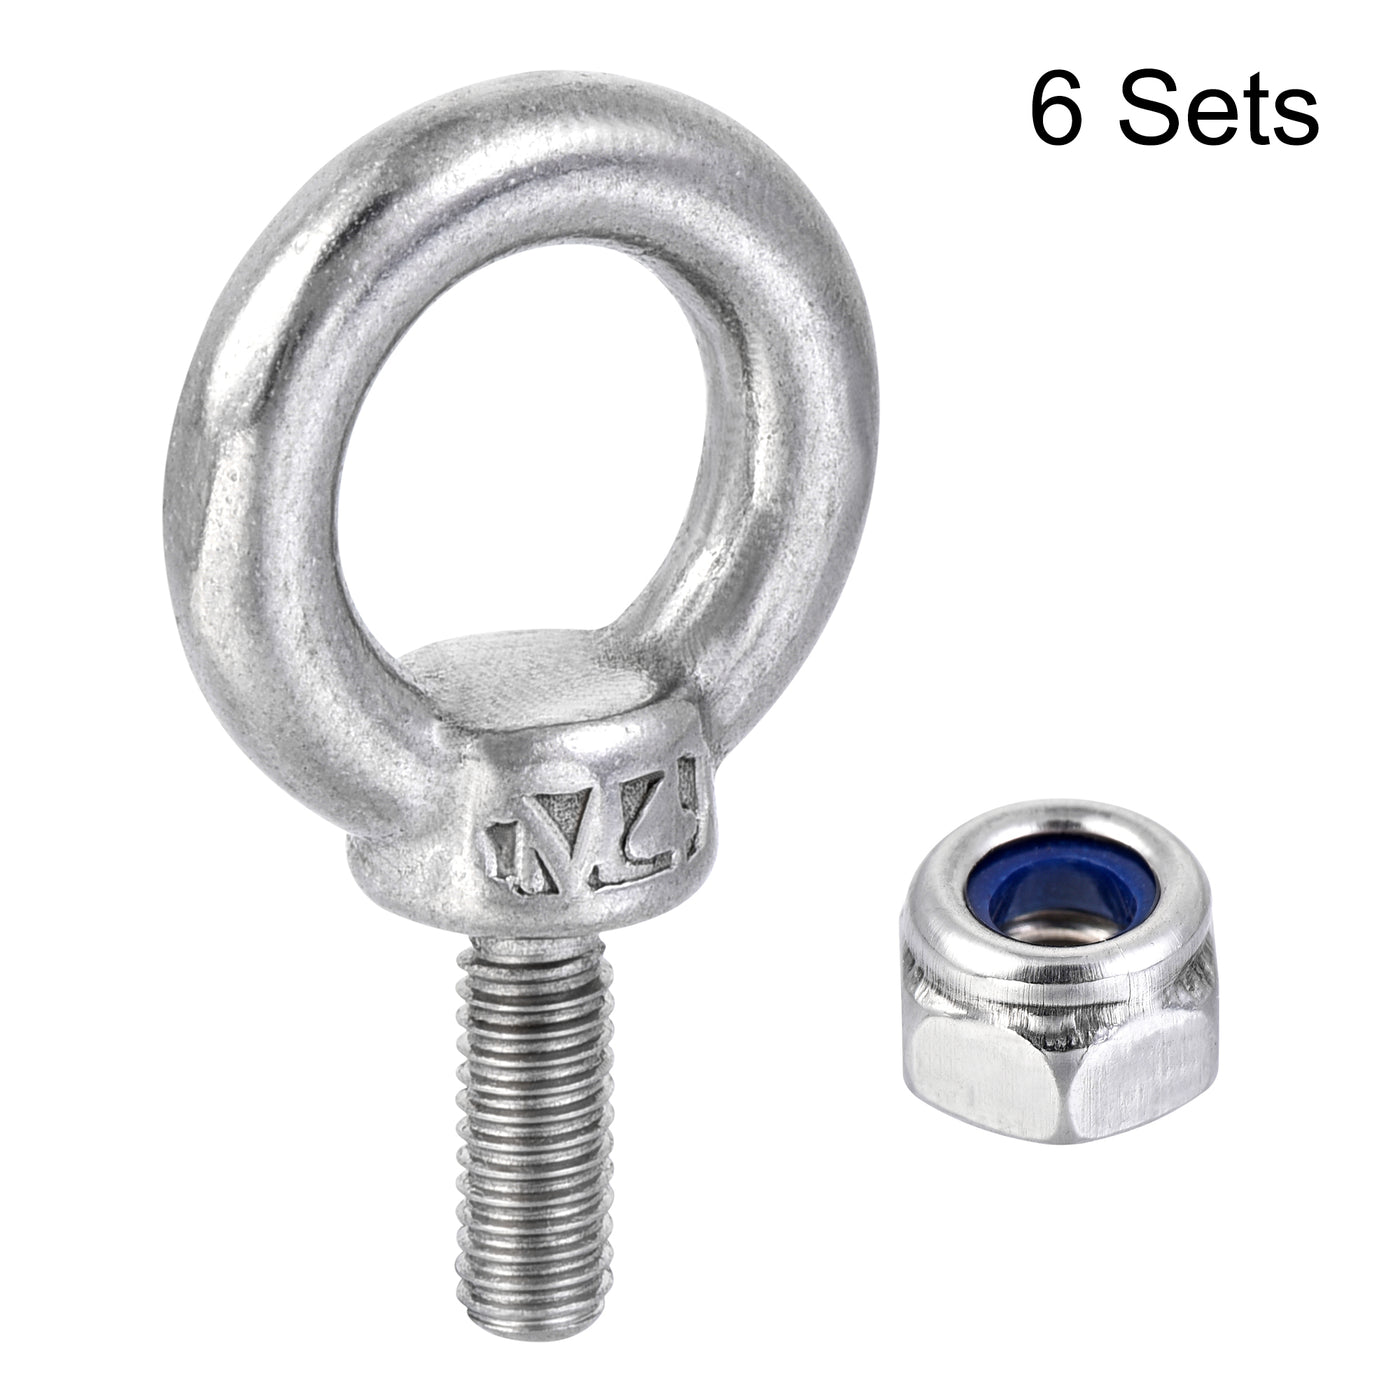 uxcell Uxcell Lifting Eye Bolt M4 x 11mm Male Thread with Hex Screw Nut for Hanging, 304 Stainless Steel, 6 Sets